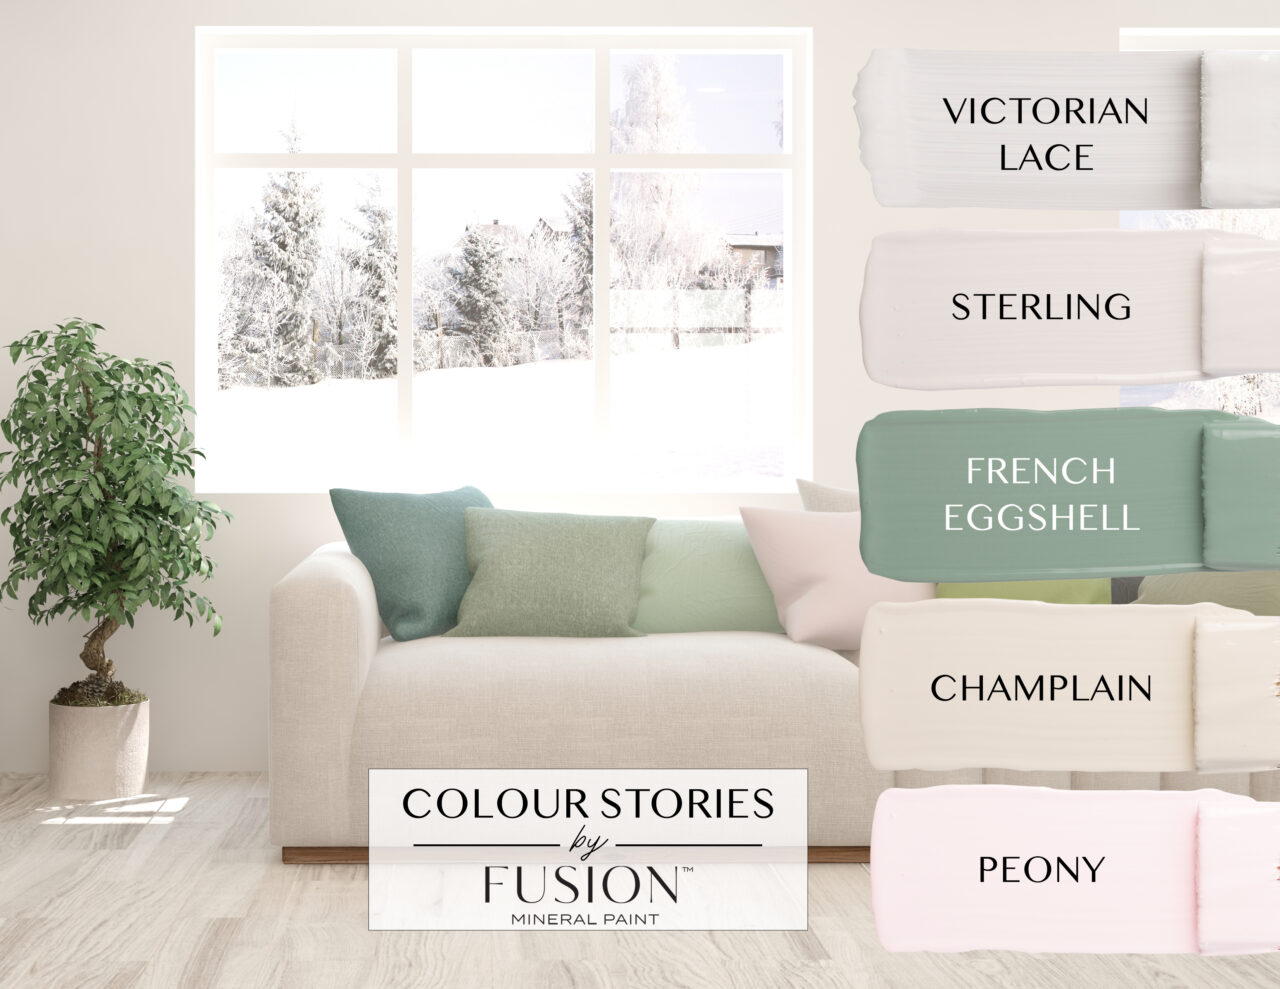  how to choose the perfect colours for a cohesive look in a room